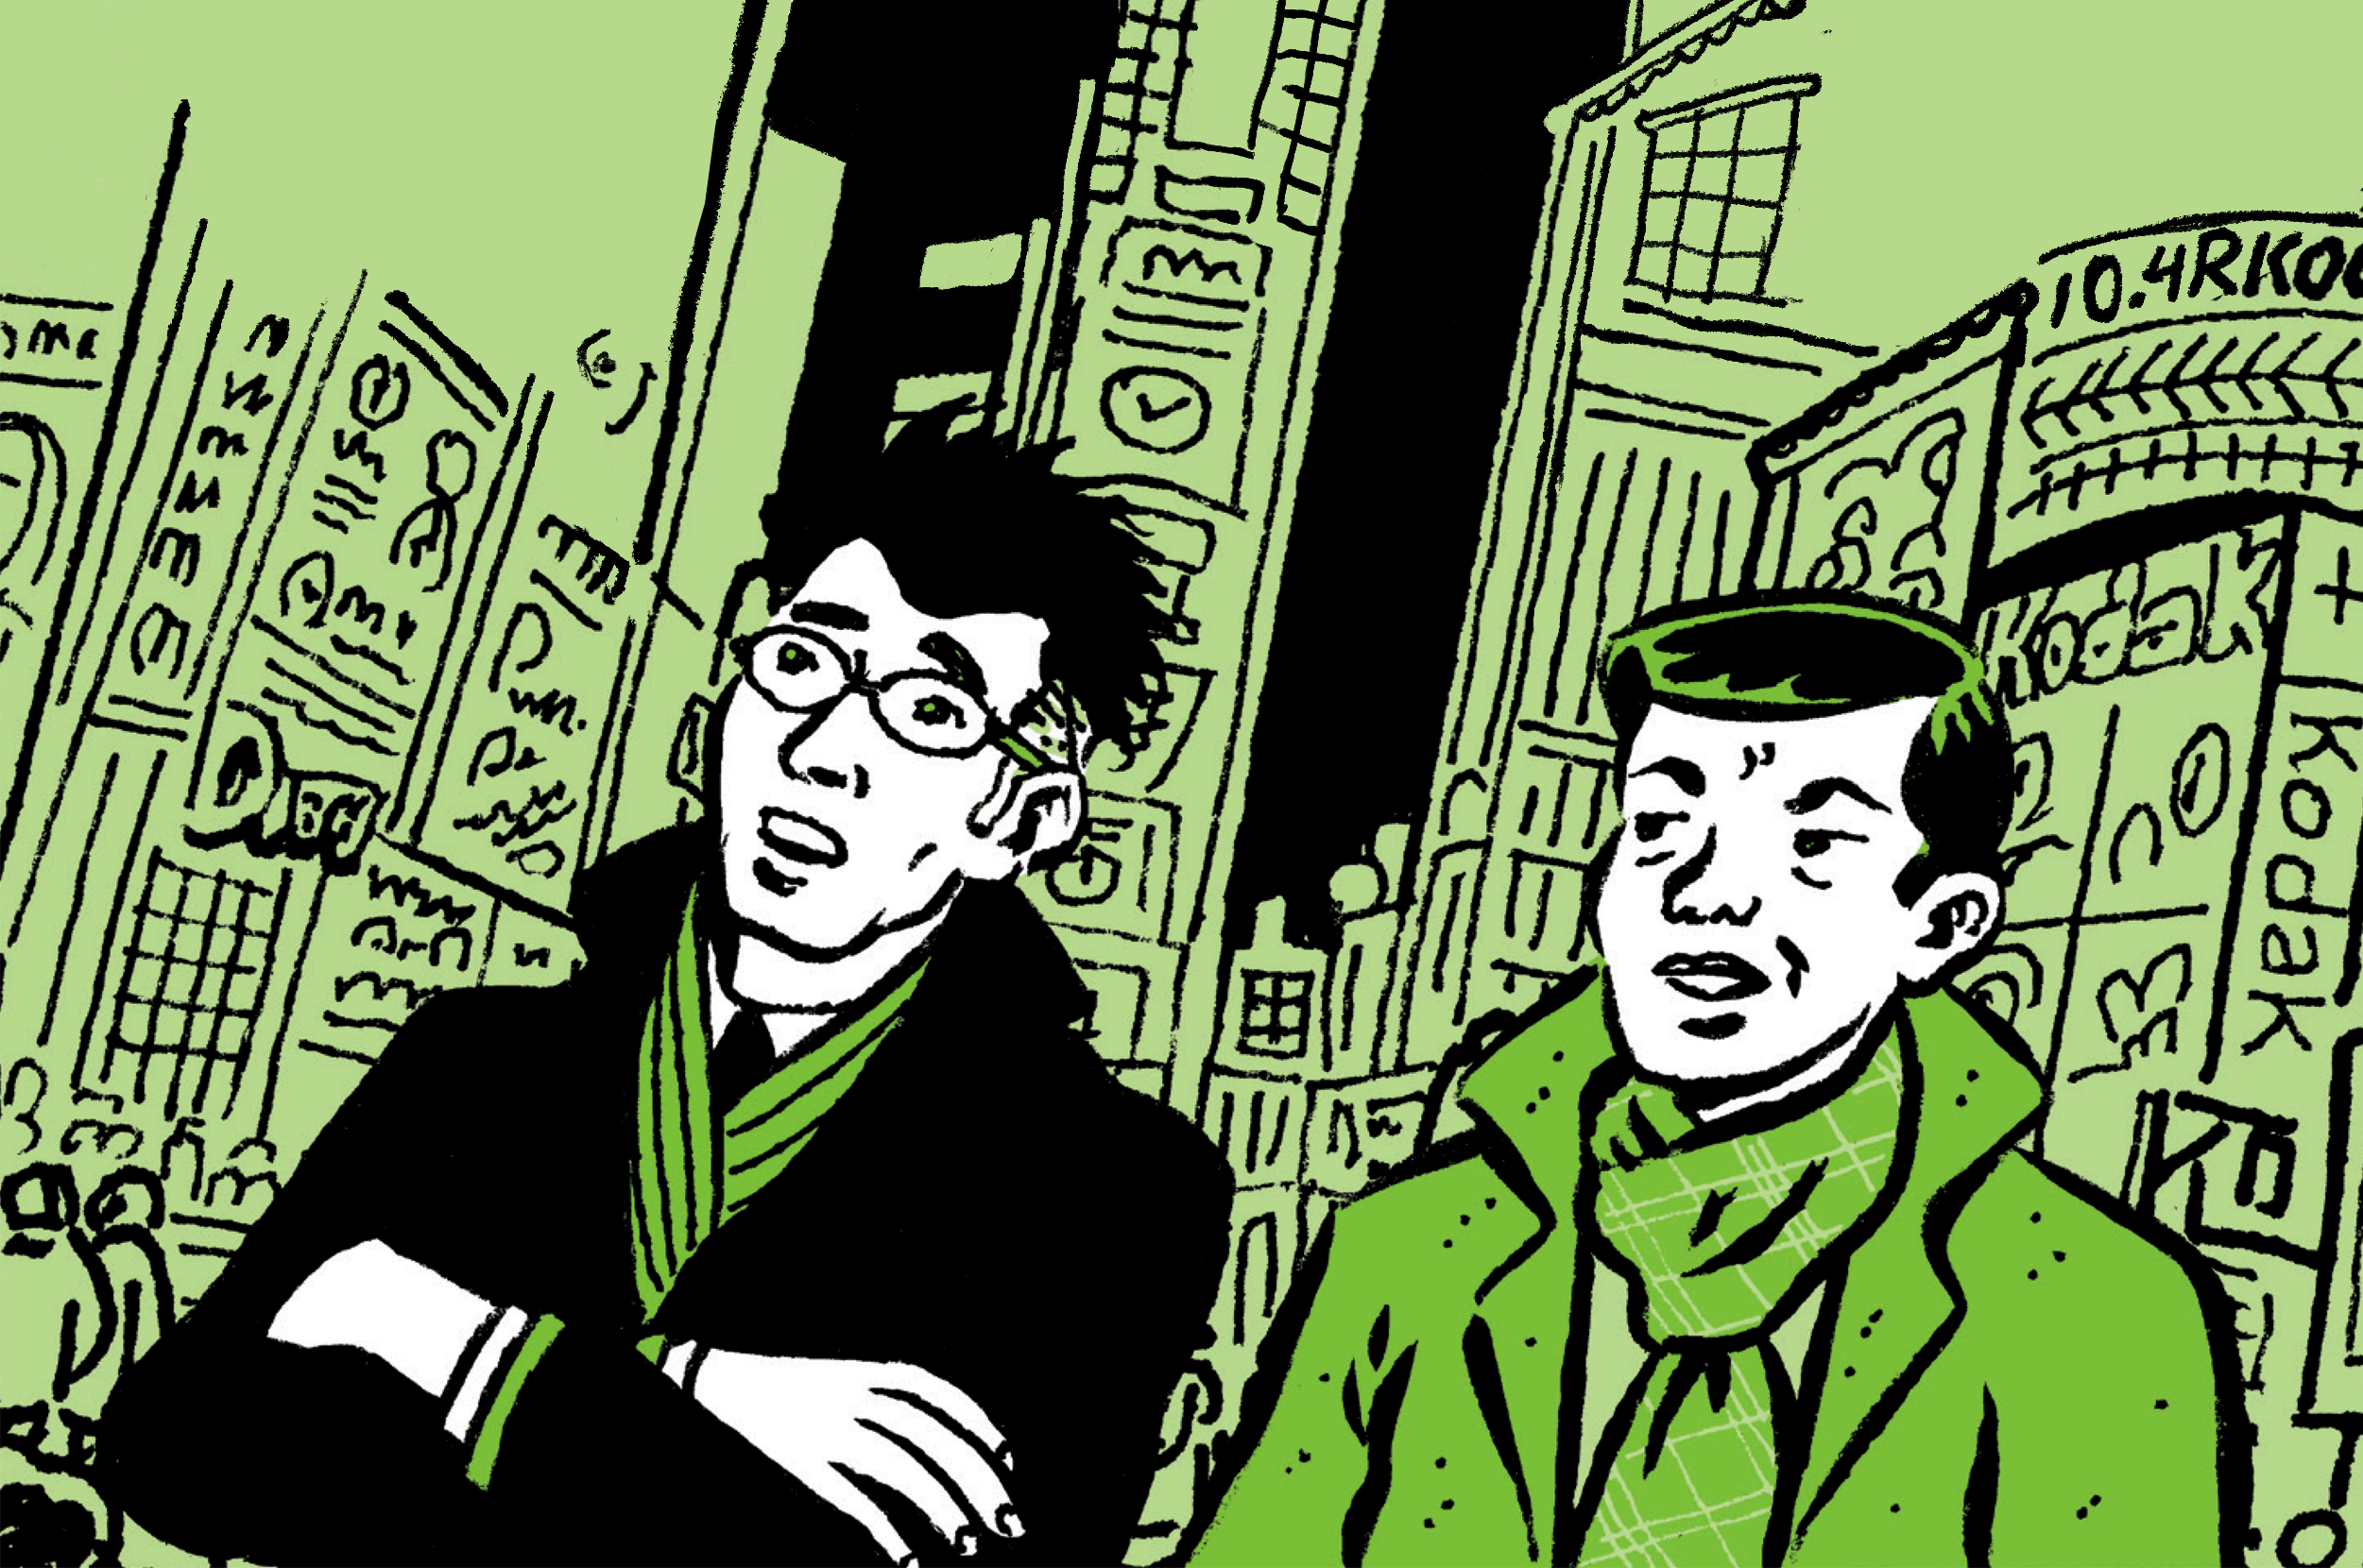 Jason and his friend stand in Times Square, looking up at the NASDAQ headquarter building. Jason says: It's been a hell of ride. I wonder how much longer it can last. His friend responds: J.F, back when you started at the firm, did you think you’d still be at it now?